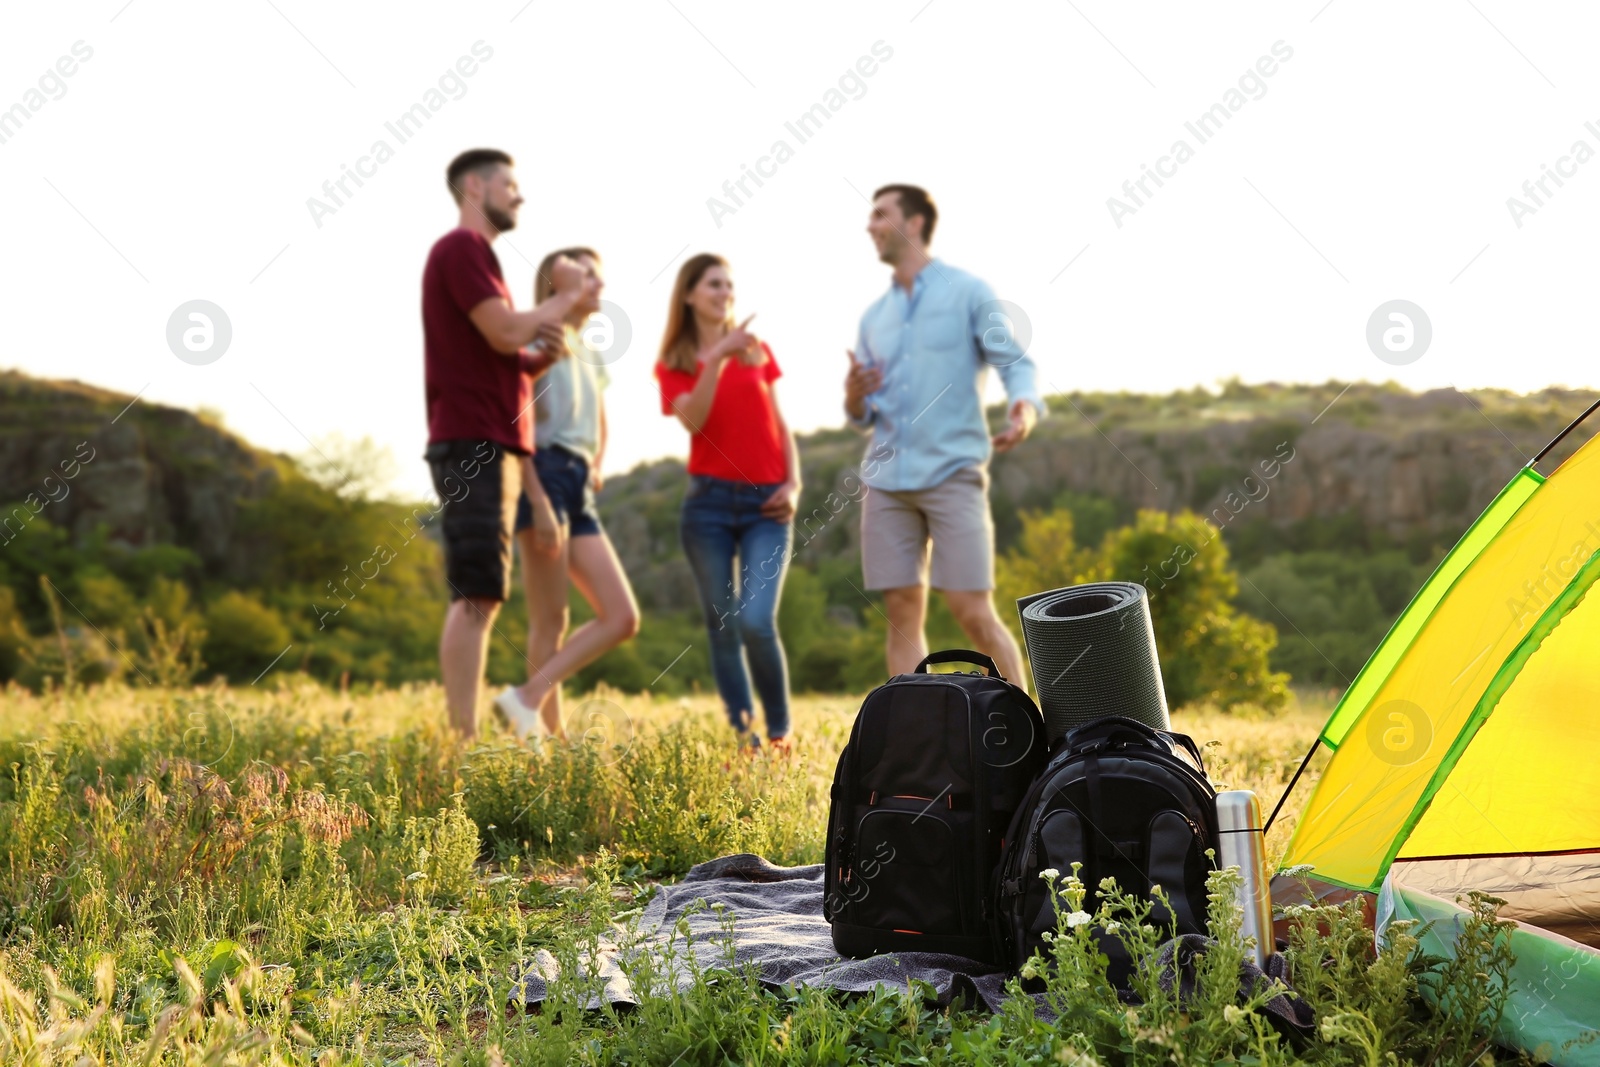 Photo of Camping gear and group of young people in wilderness